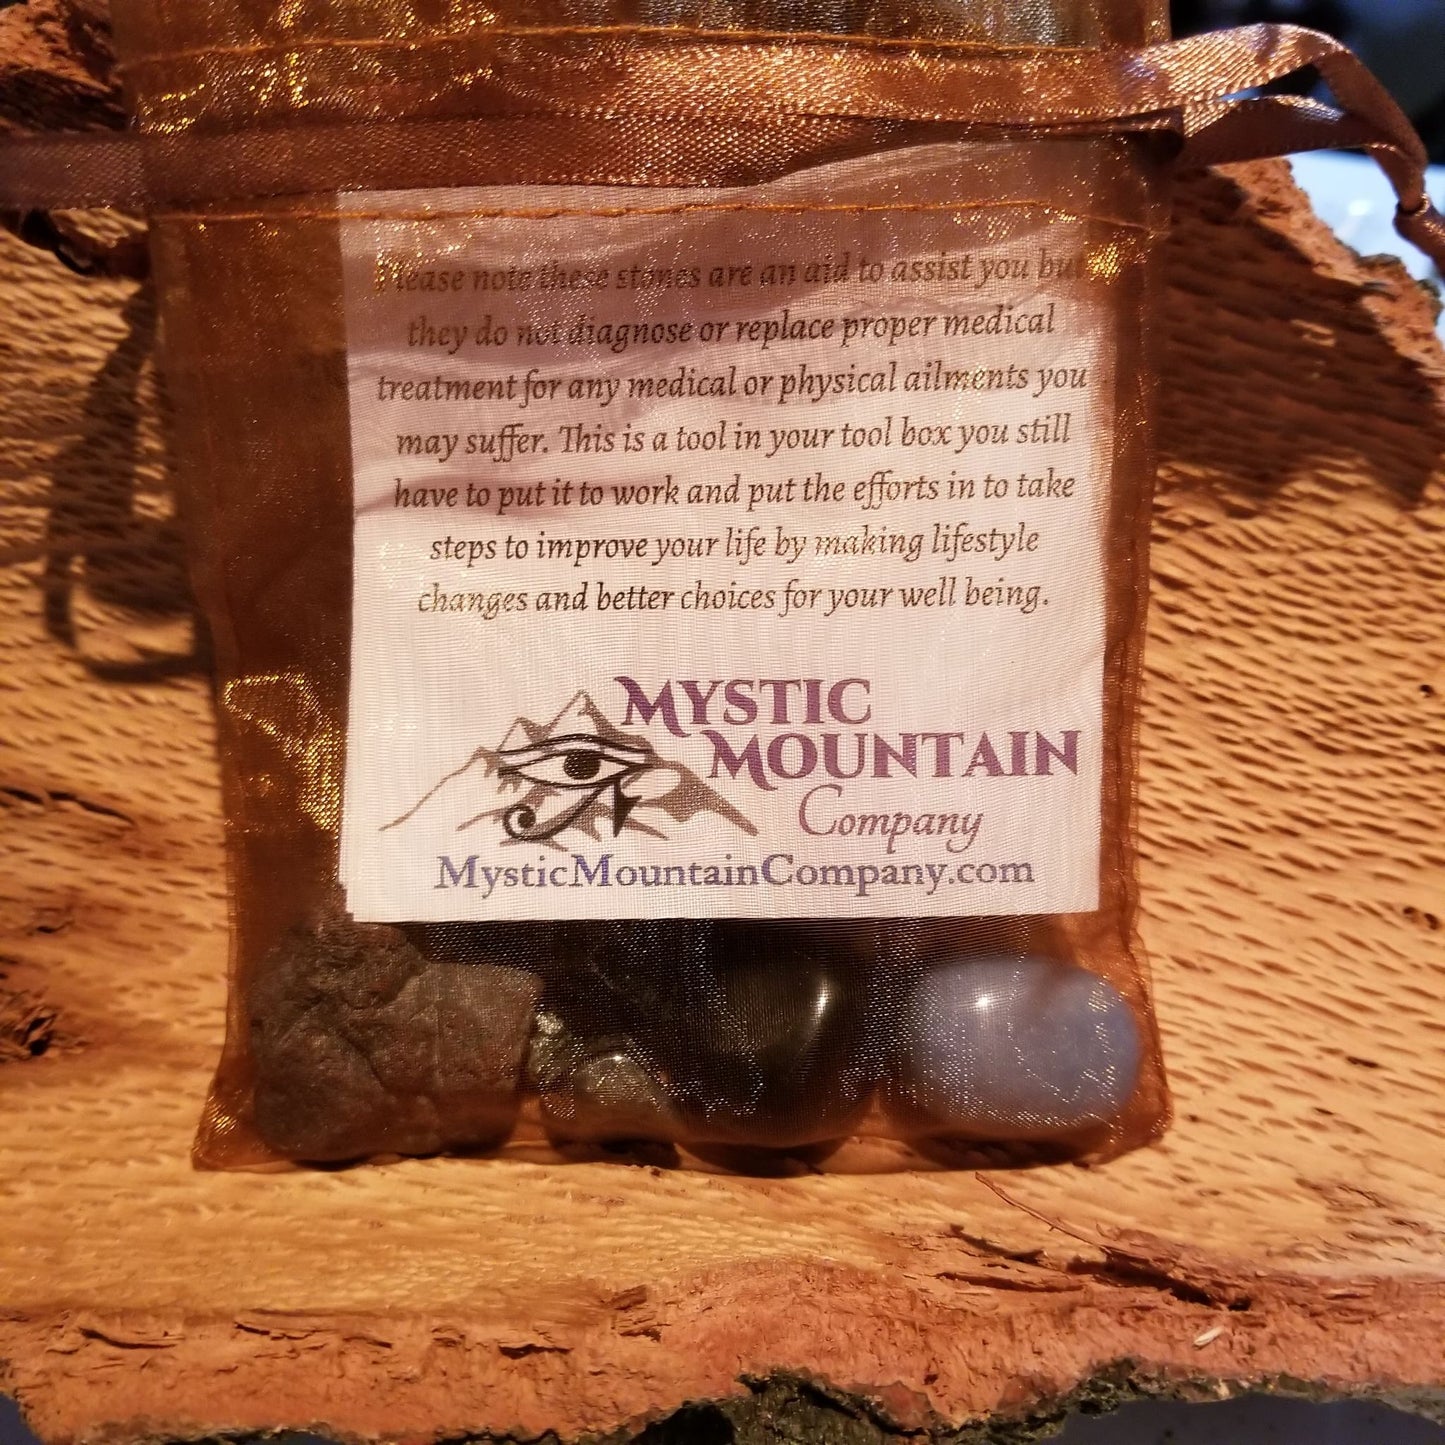 Crystal Intention Pouch, Grounding